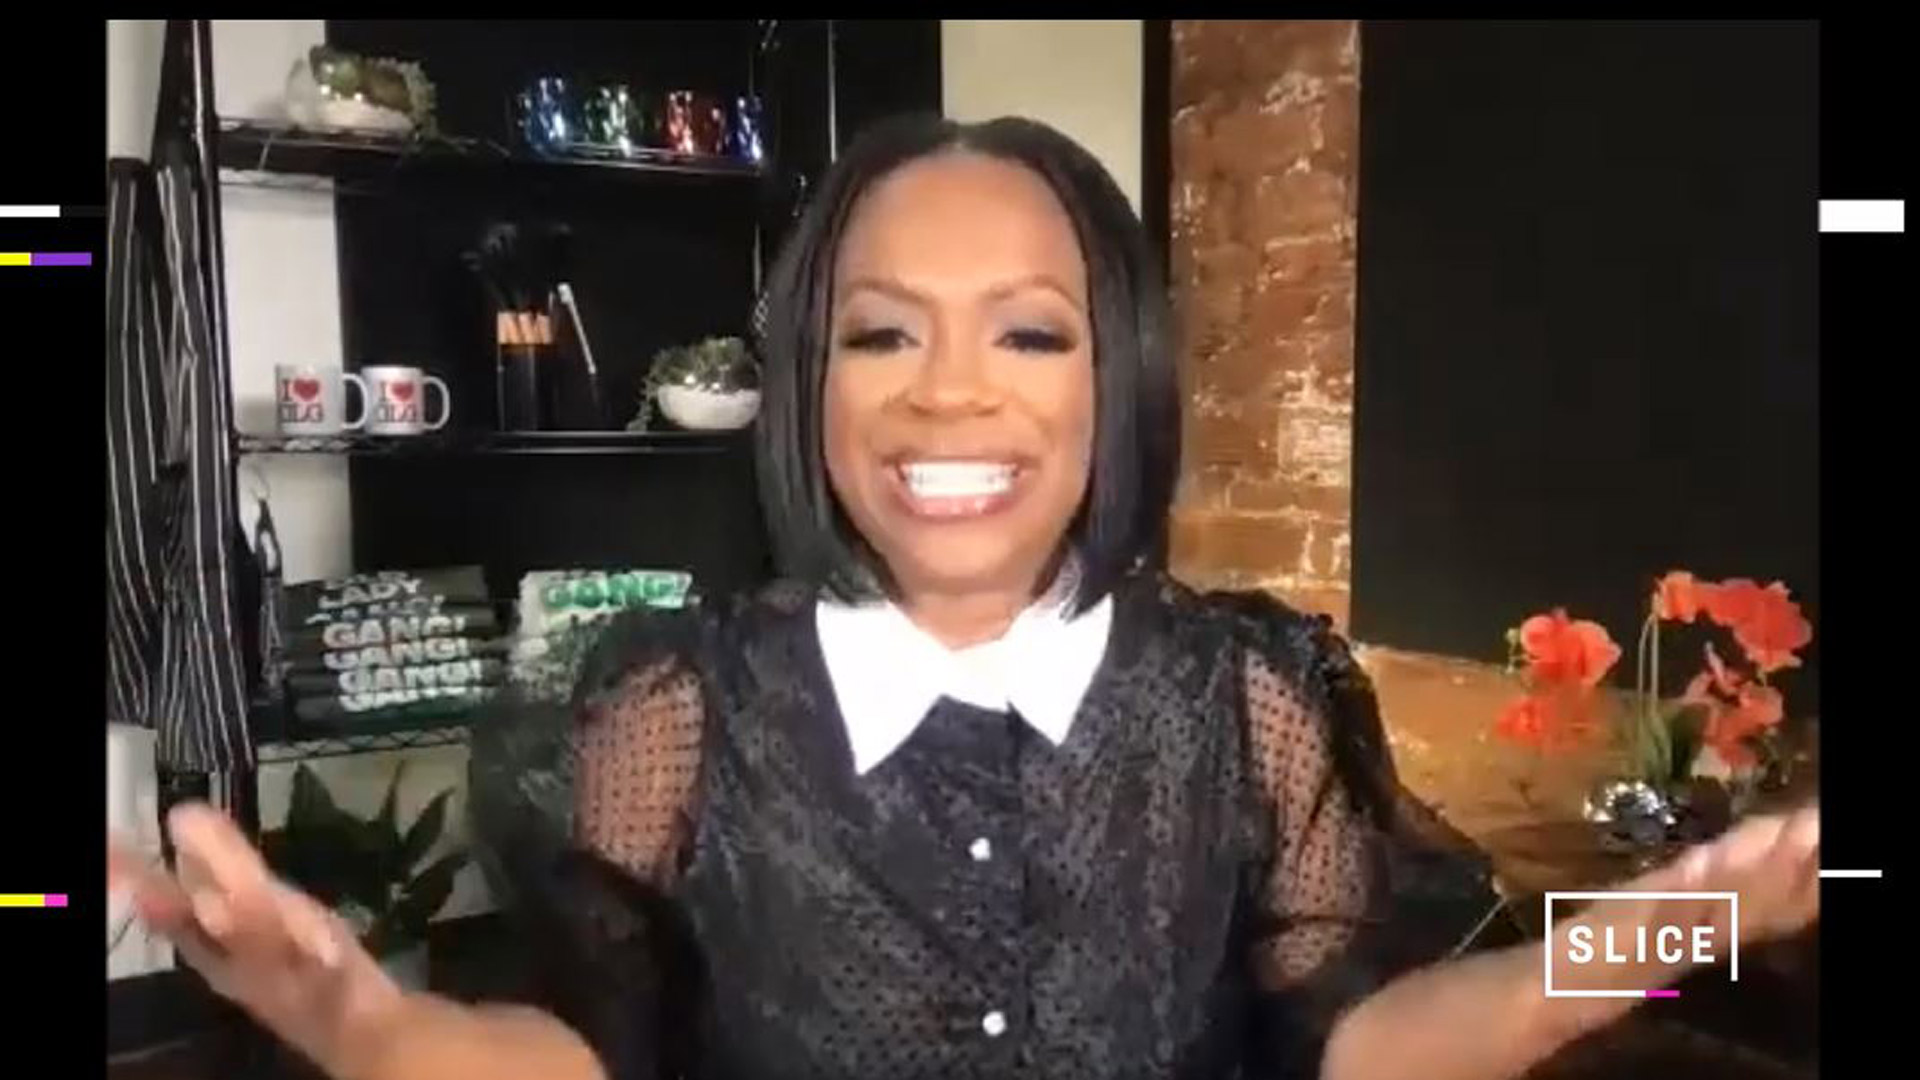 Kandi Burruss on How to Boss Up in Your Own Life, Kandi & the Gang and More. Go to a video page.